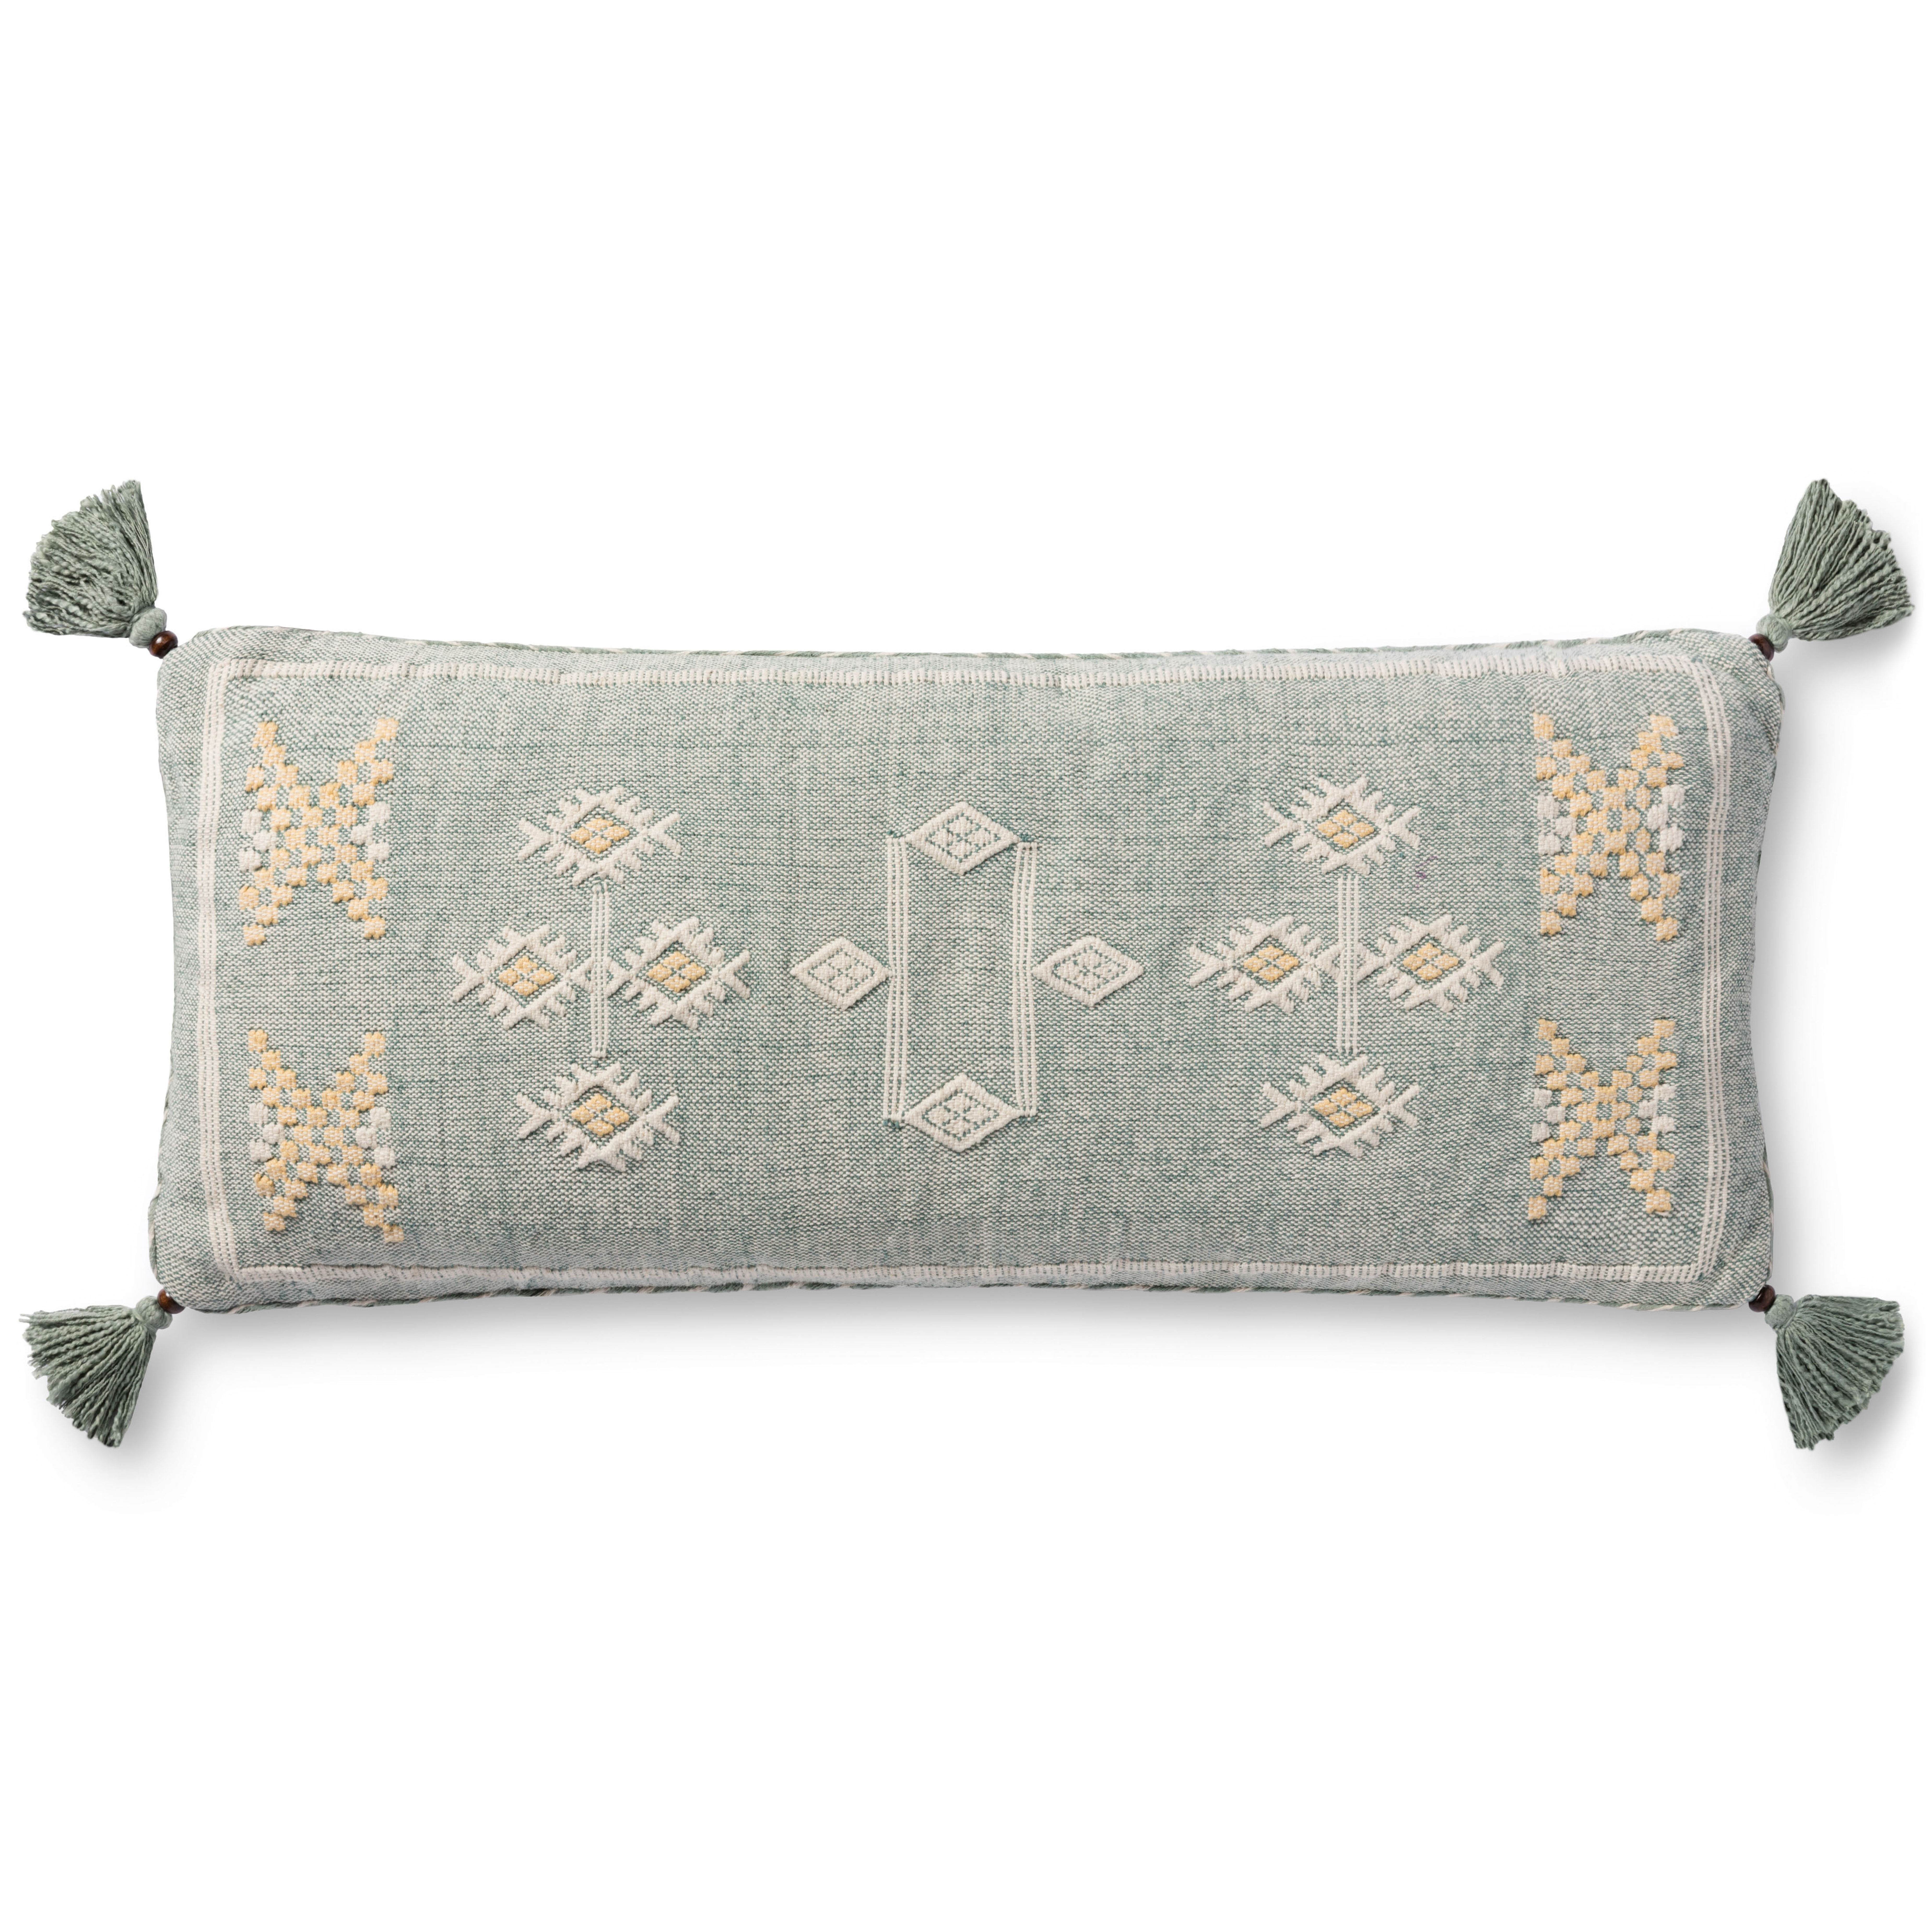 Handcrafted Lumbar Pillow, Green, 13" x 35" - ED Ellen DeGeneres Crafted by Loloi Rugs